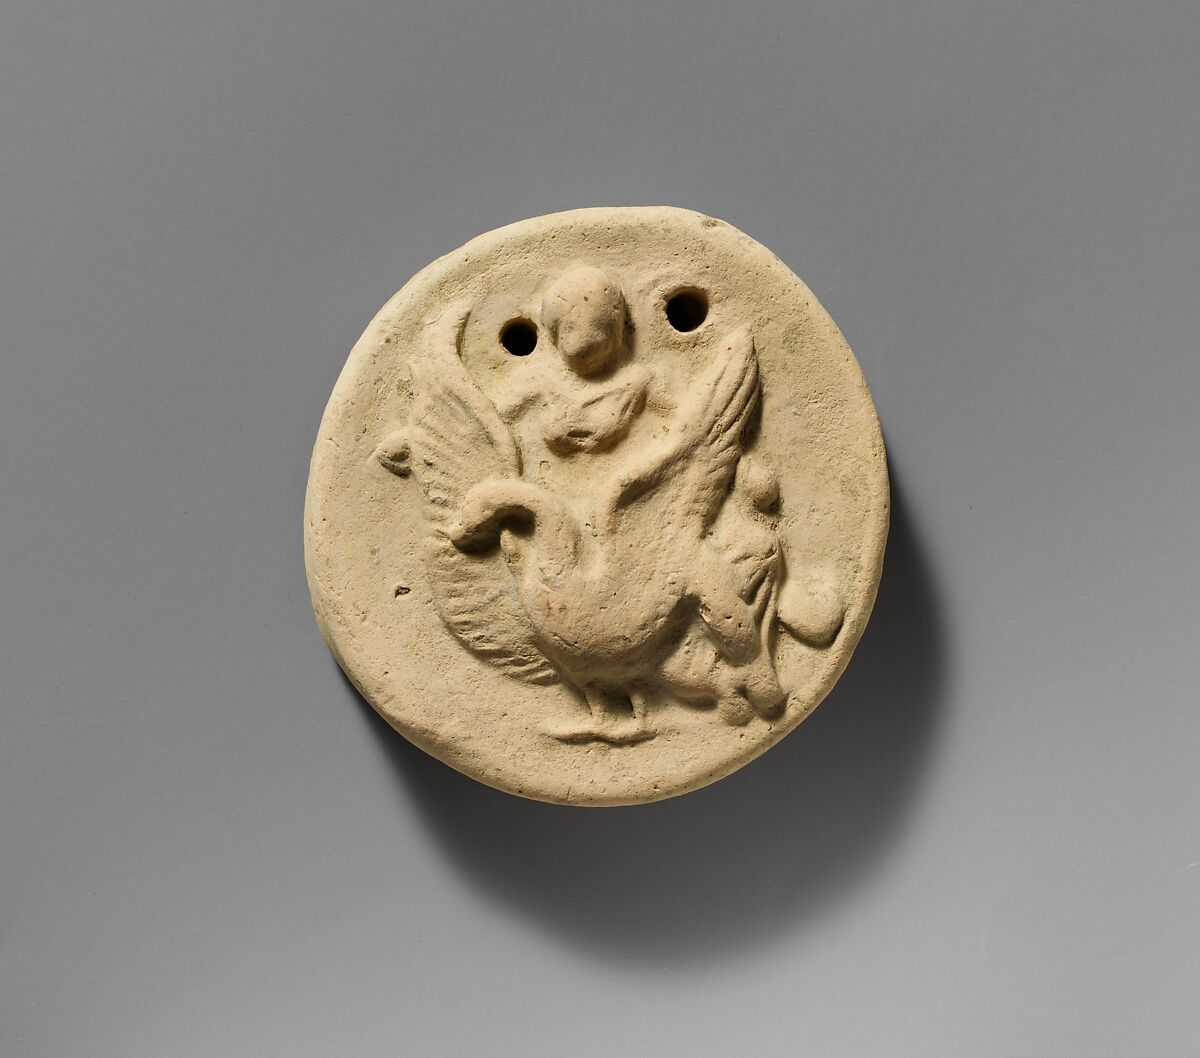 Terracotta disk with Aphrodite riding on a swan, Terracotta, Greek 